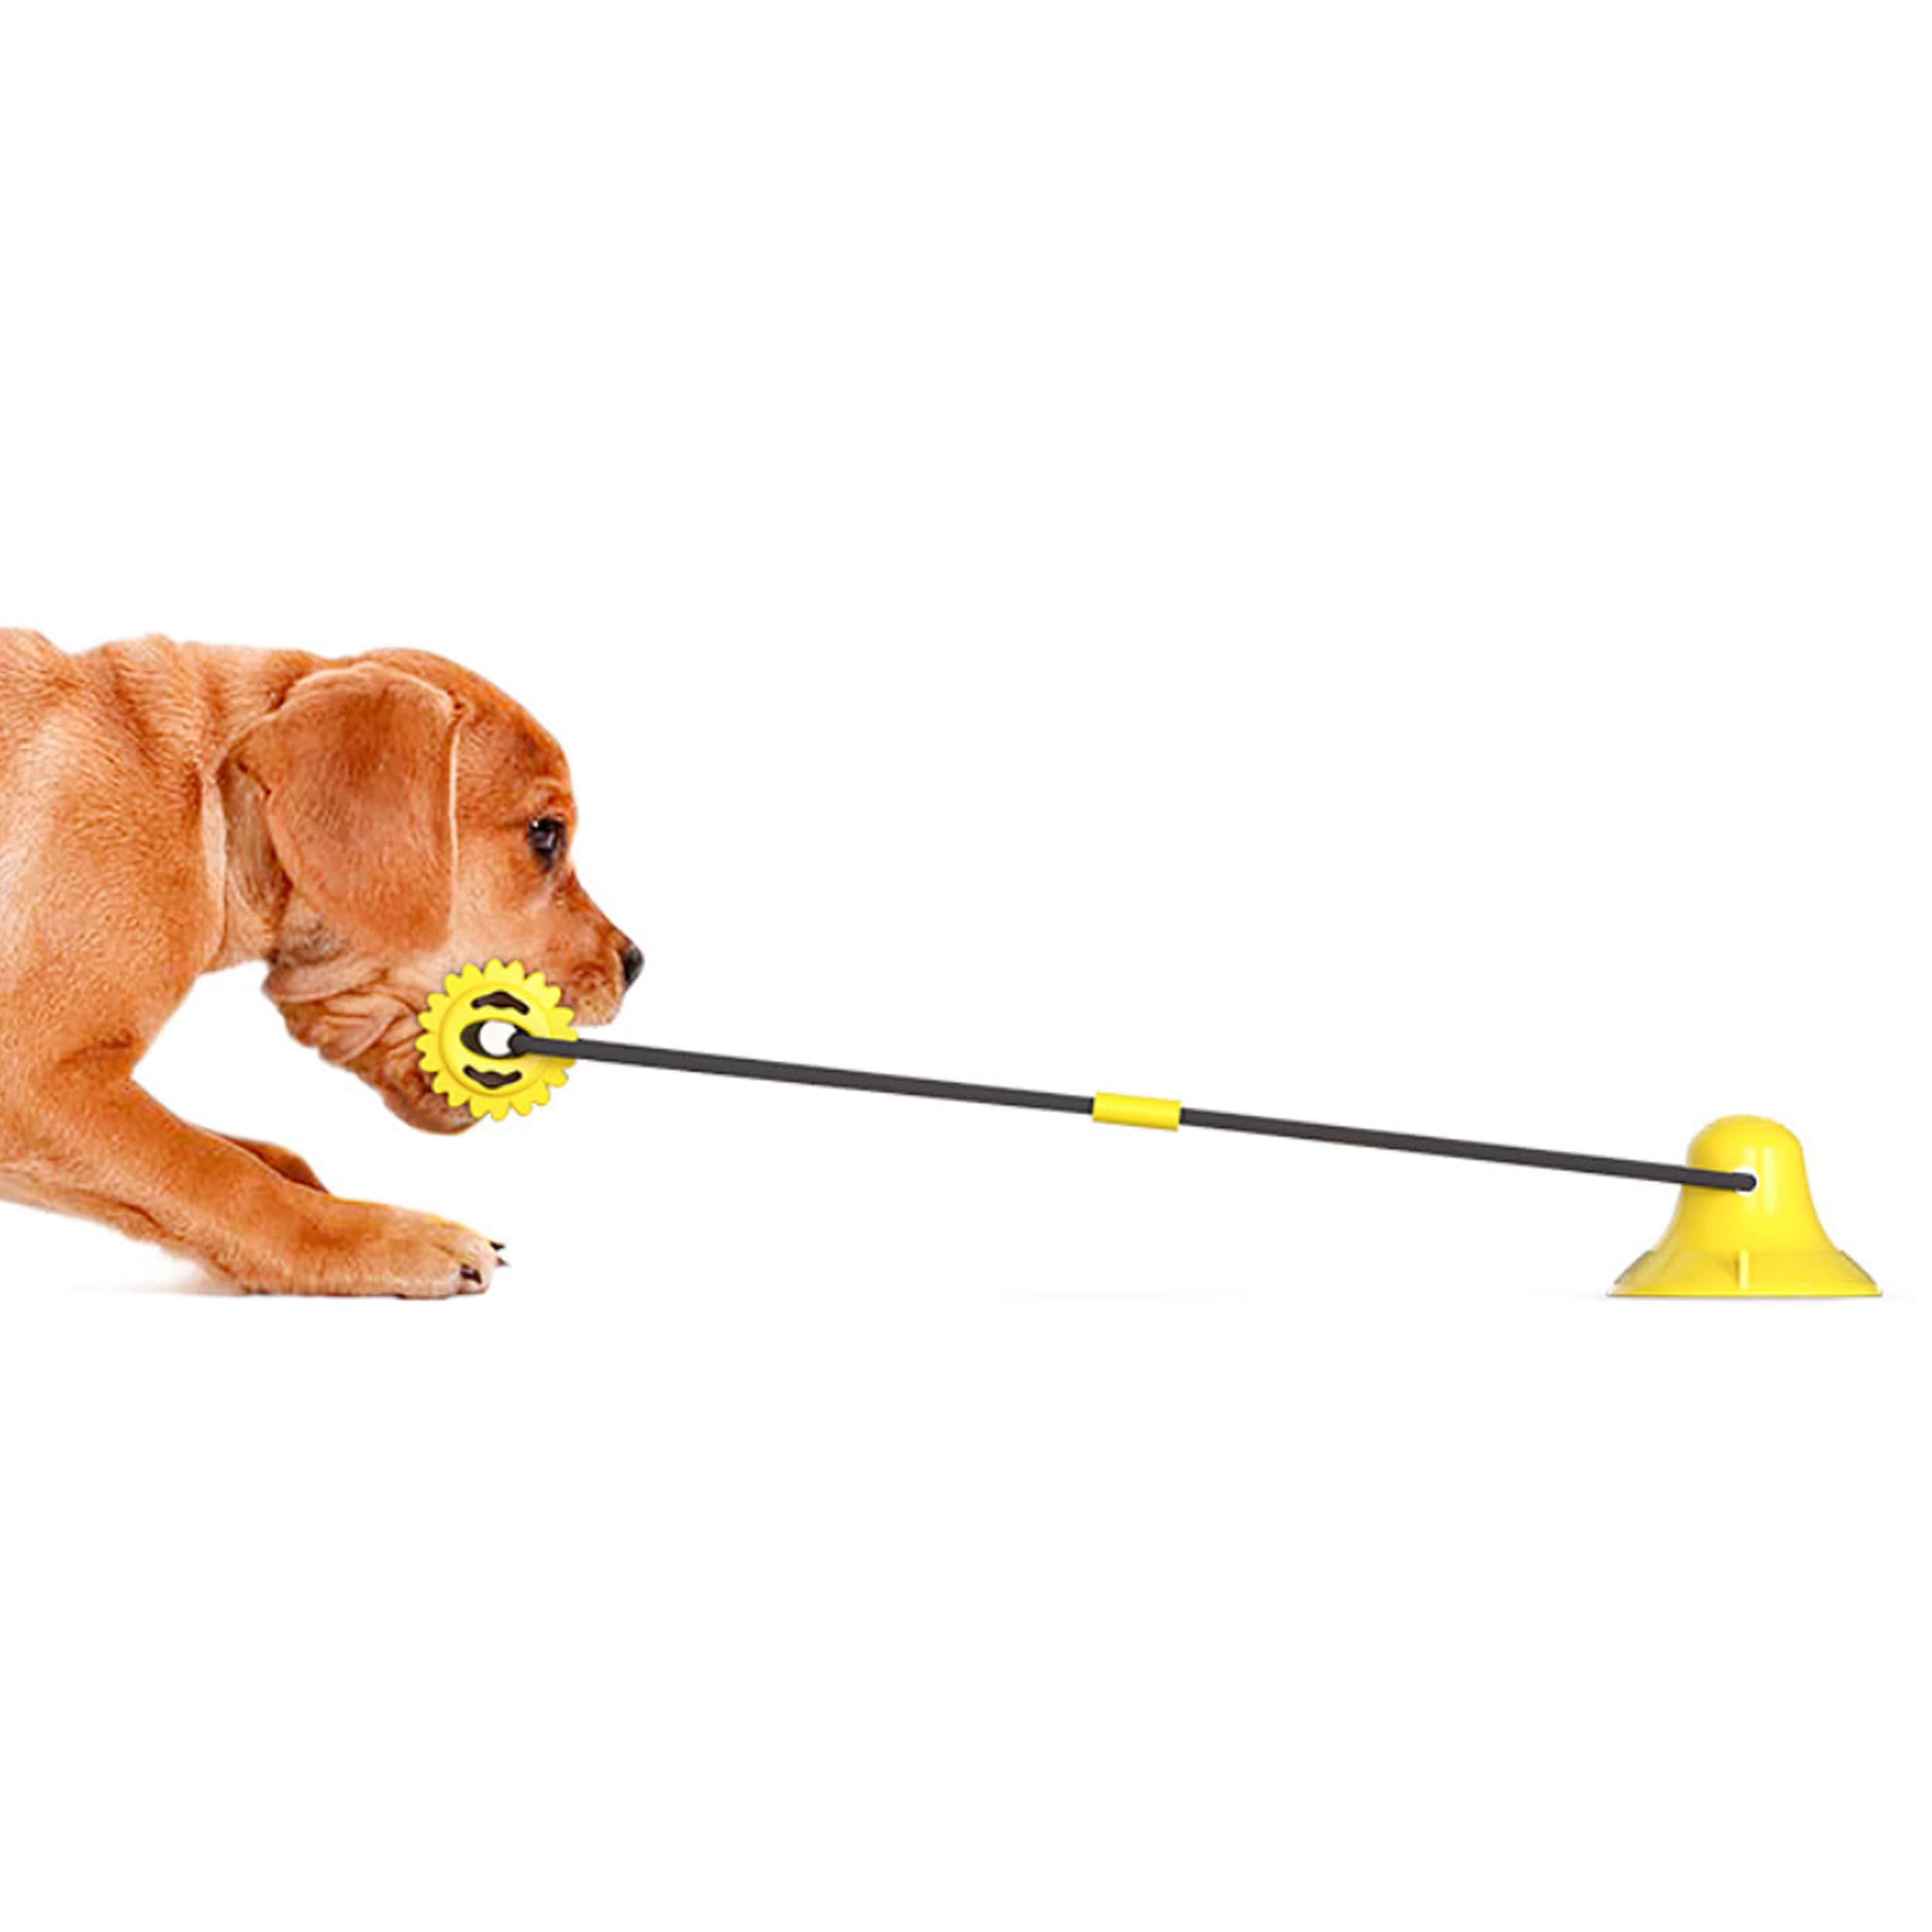 Vacuum Suction Cup For Dogs